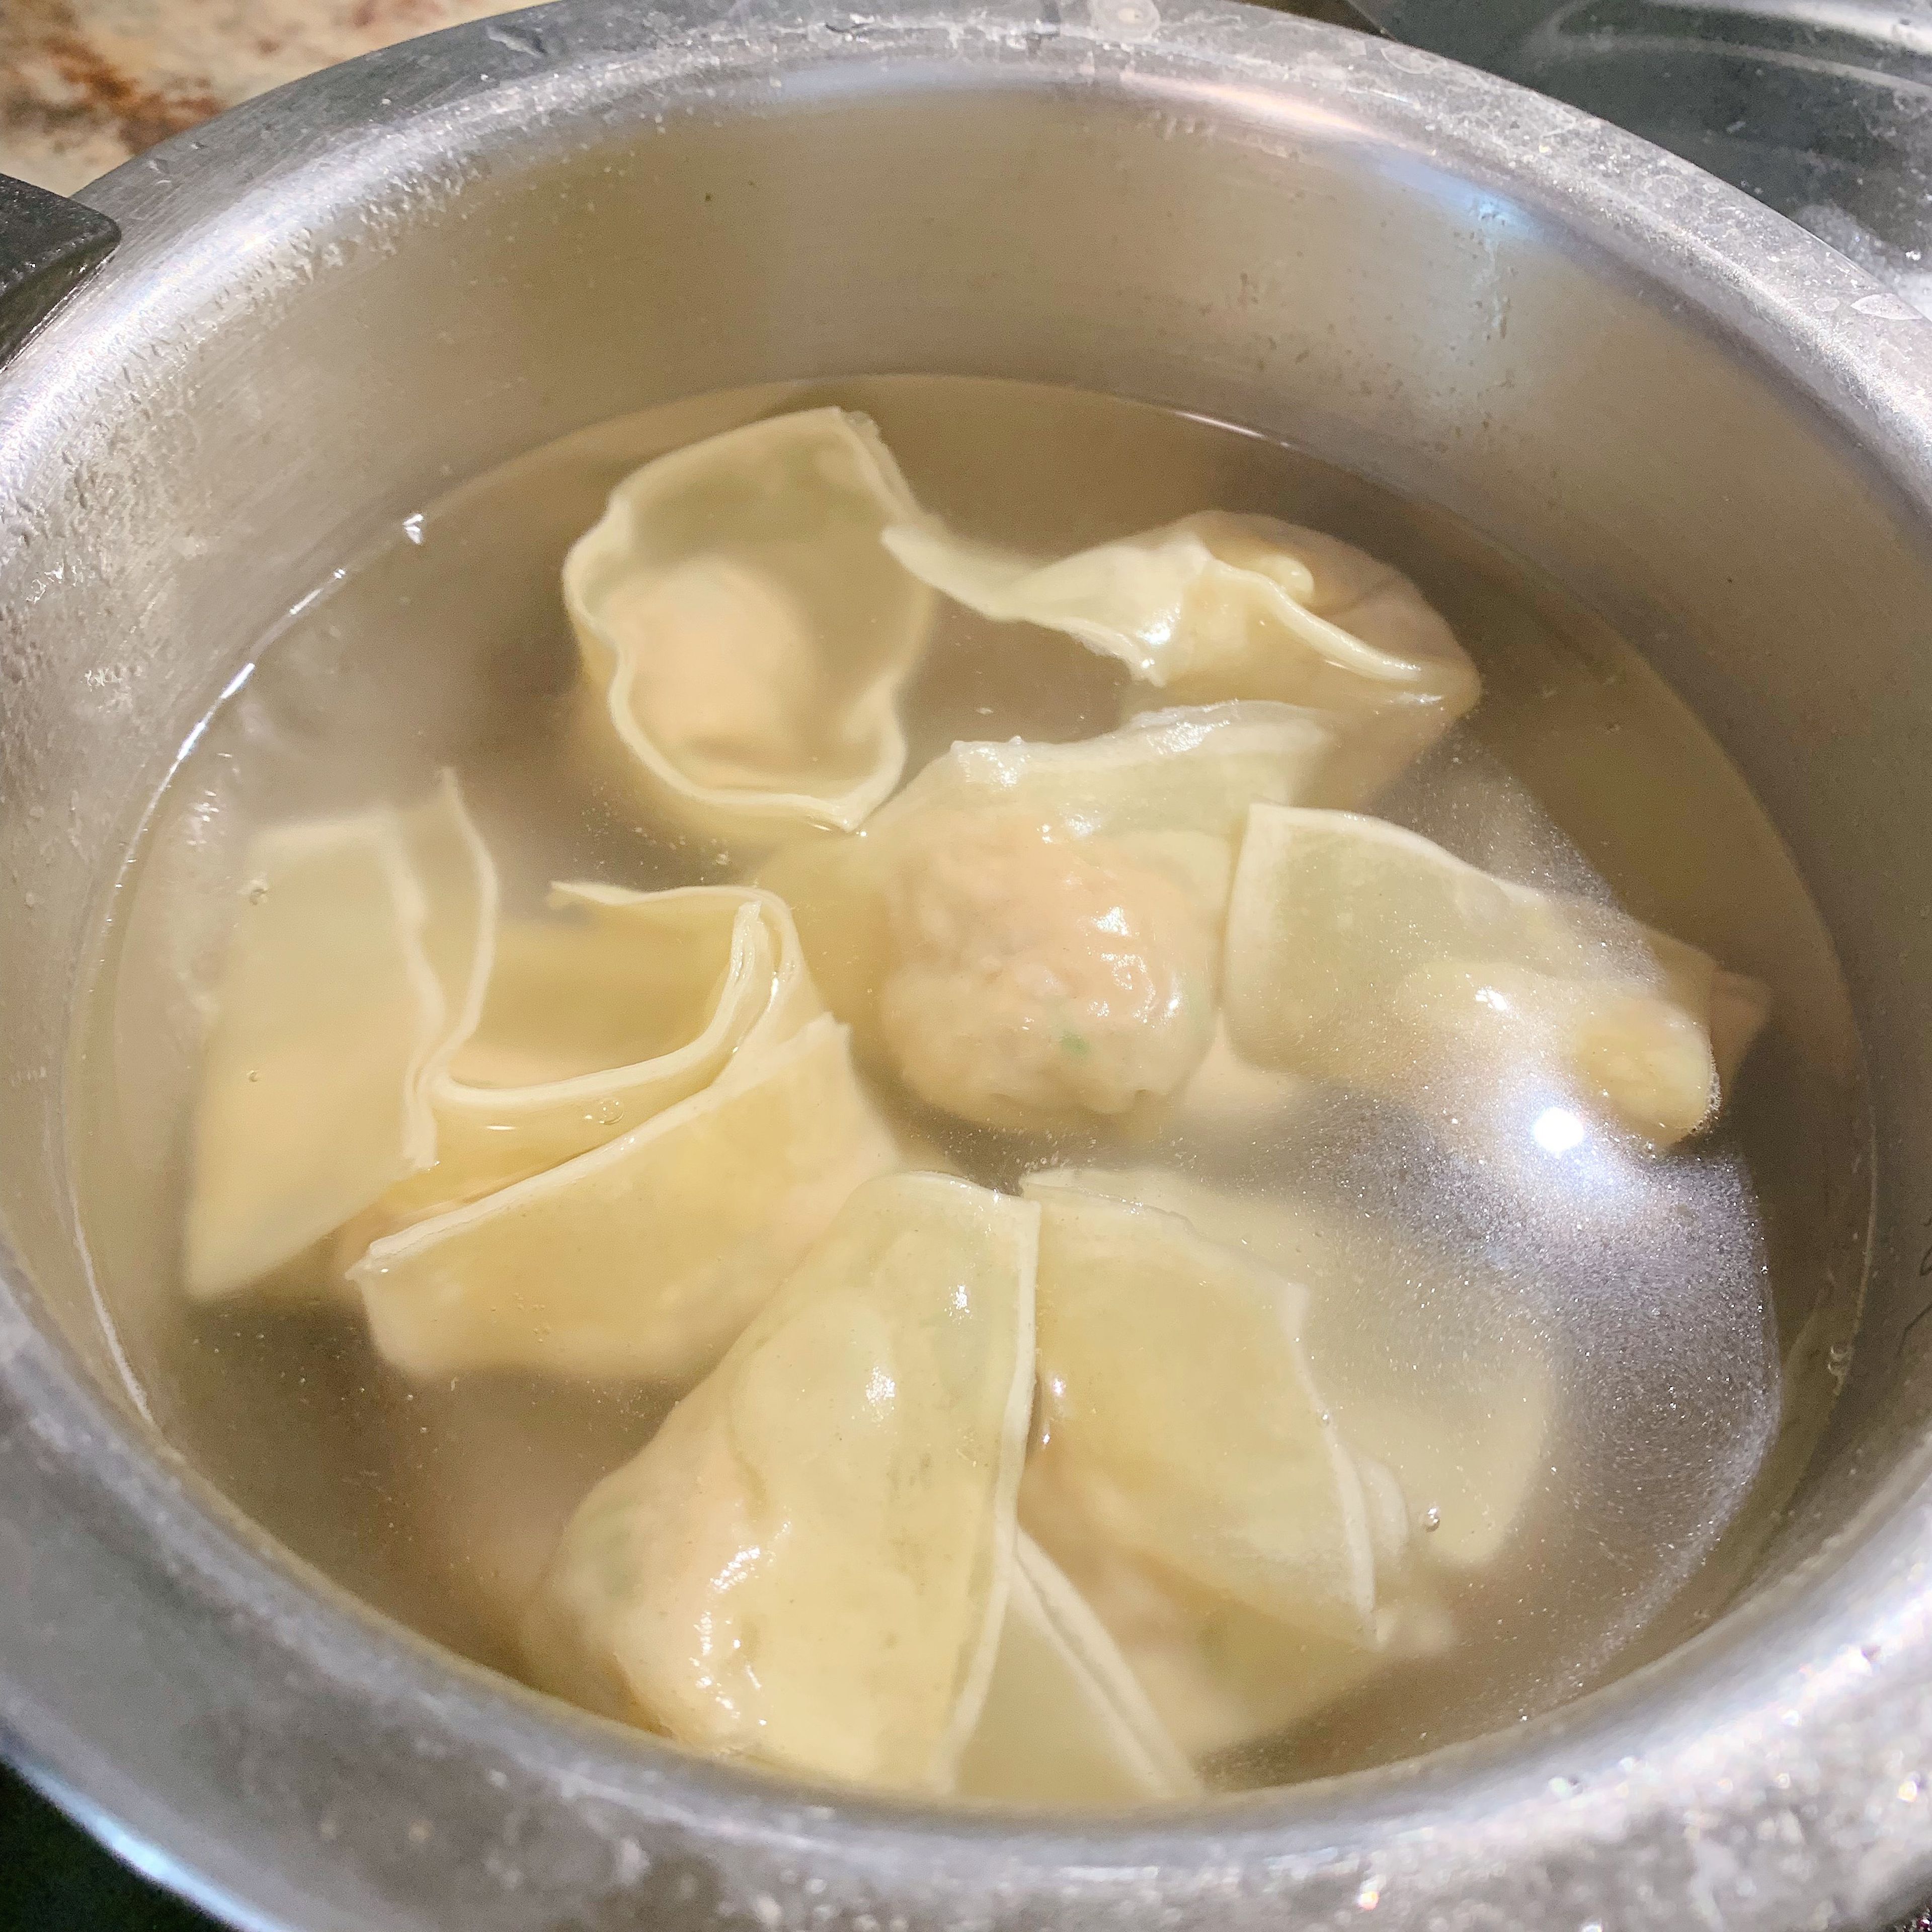 To enjoy now, cook wonton s in boiling water over medium-high heat. Once the water is boiling again, add some cold water. Repeat this process one more time. When the wontons are floating and the wrappers are almost translucent, they’re done. Store the rest in freezer for up to 1 month.